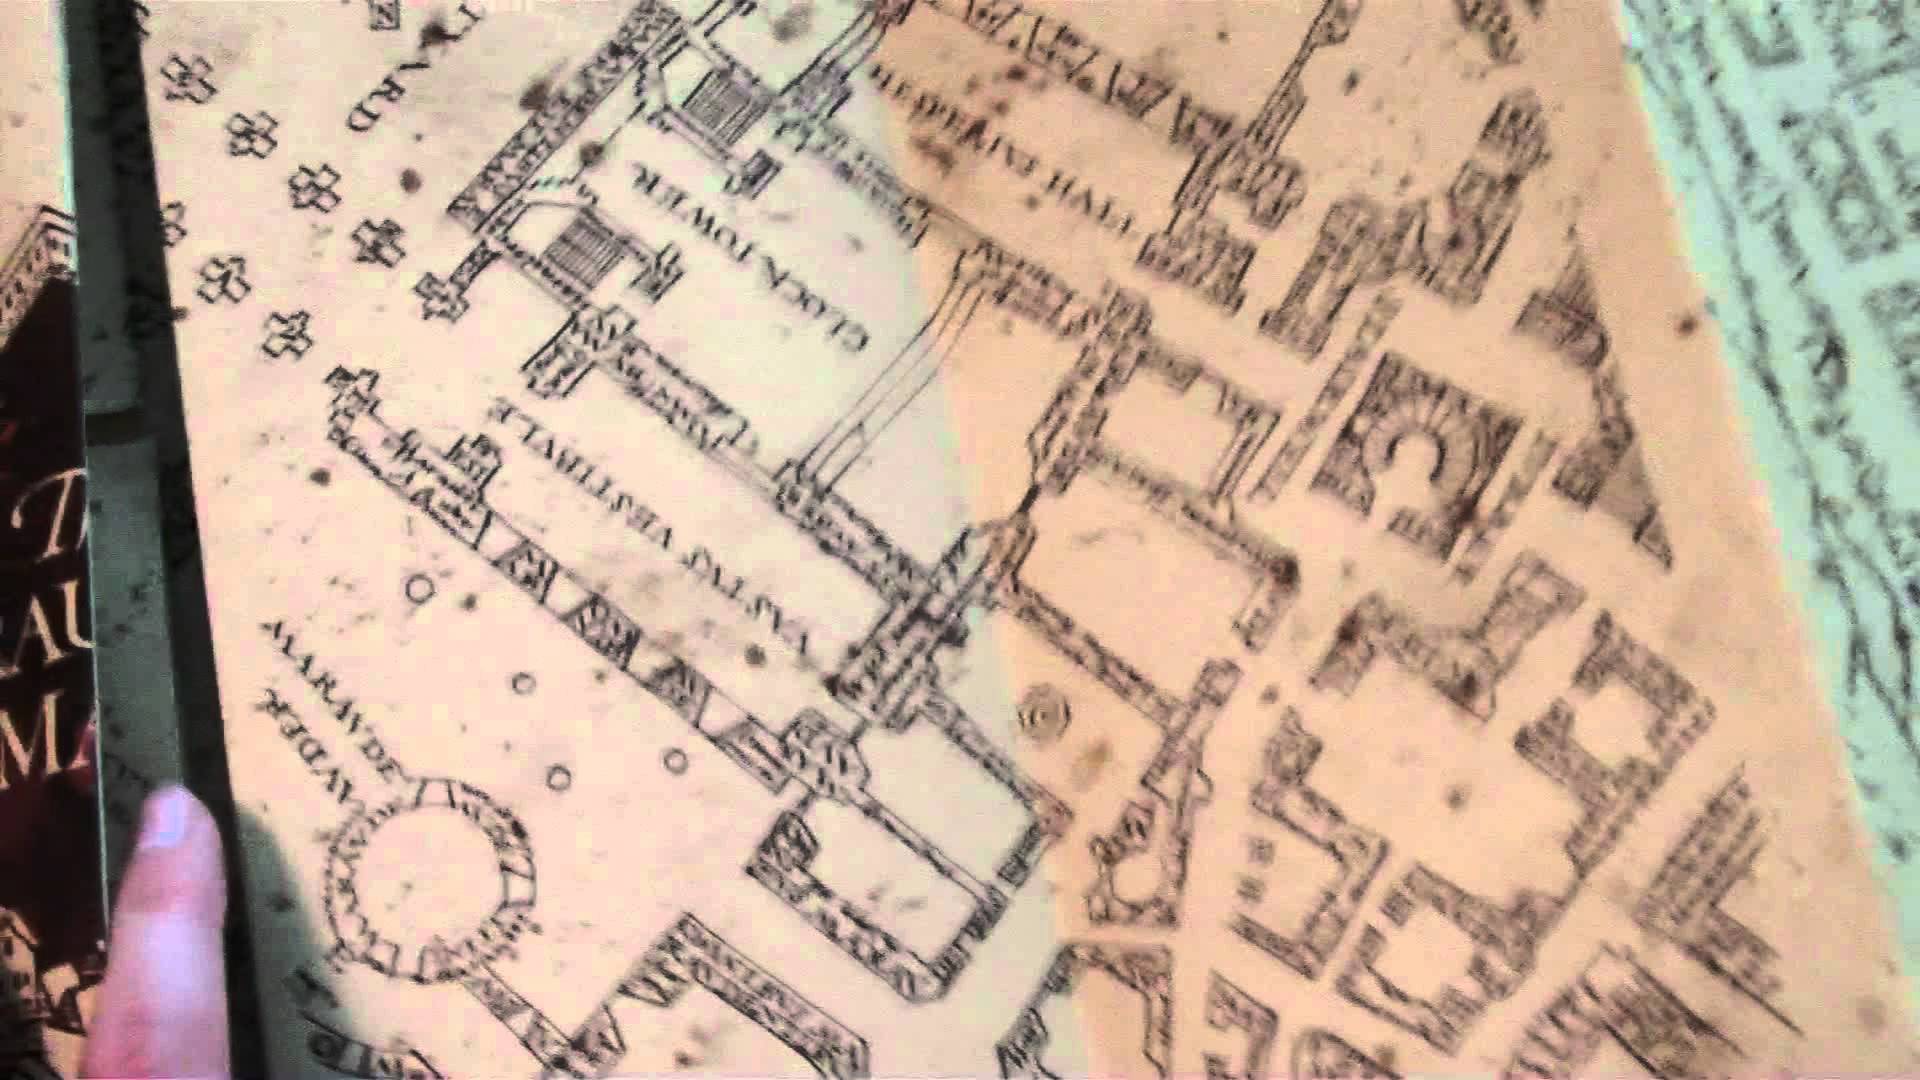 Noble Collection: Marauder's Map (Nice View of Details) - YouTube